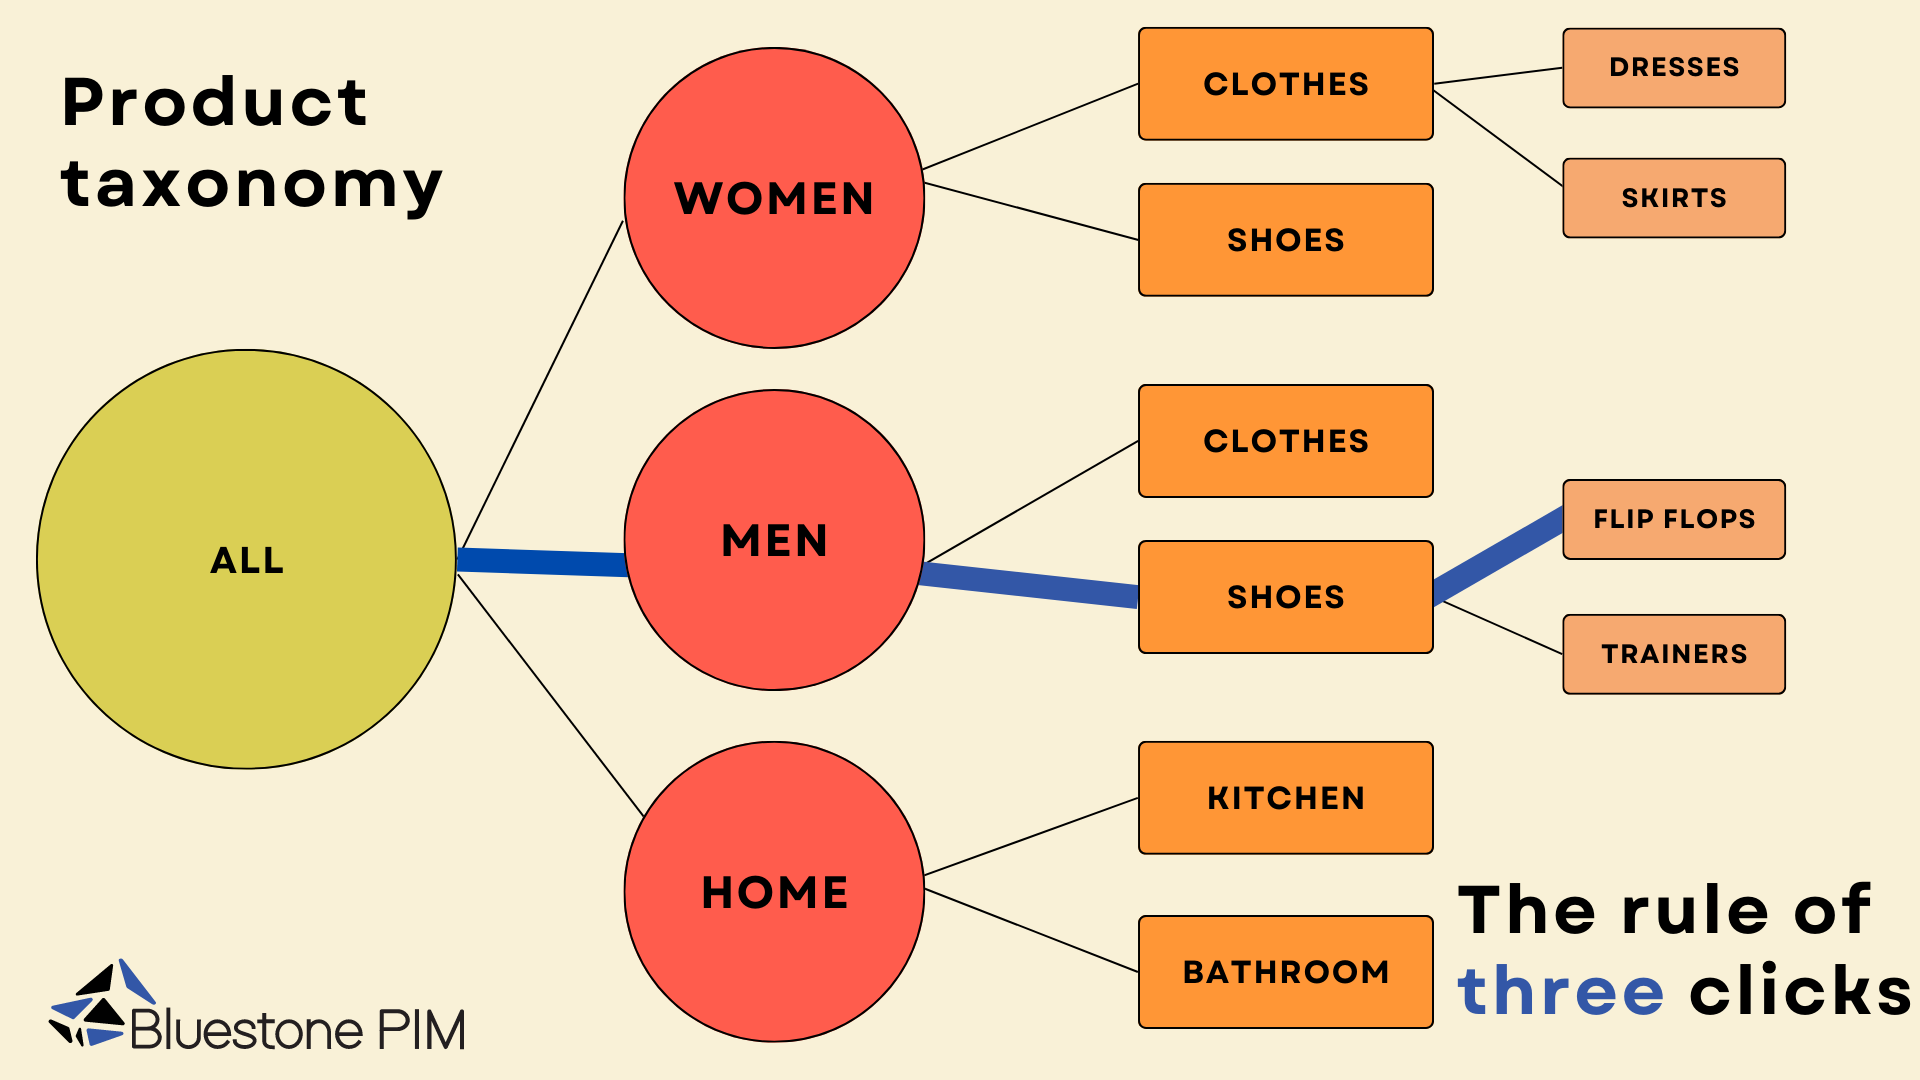 A visualisation of product taxonomy for an online retail business